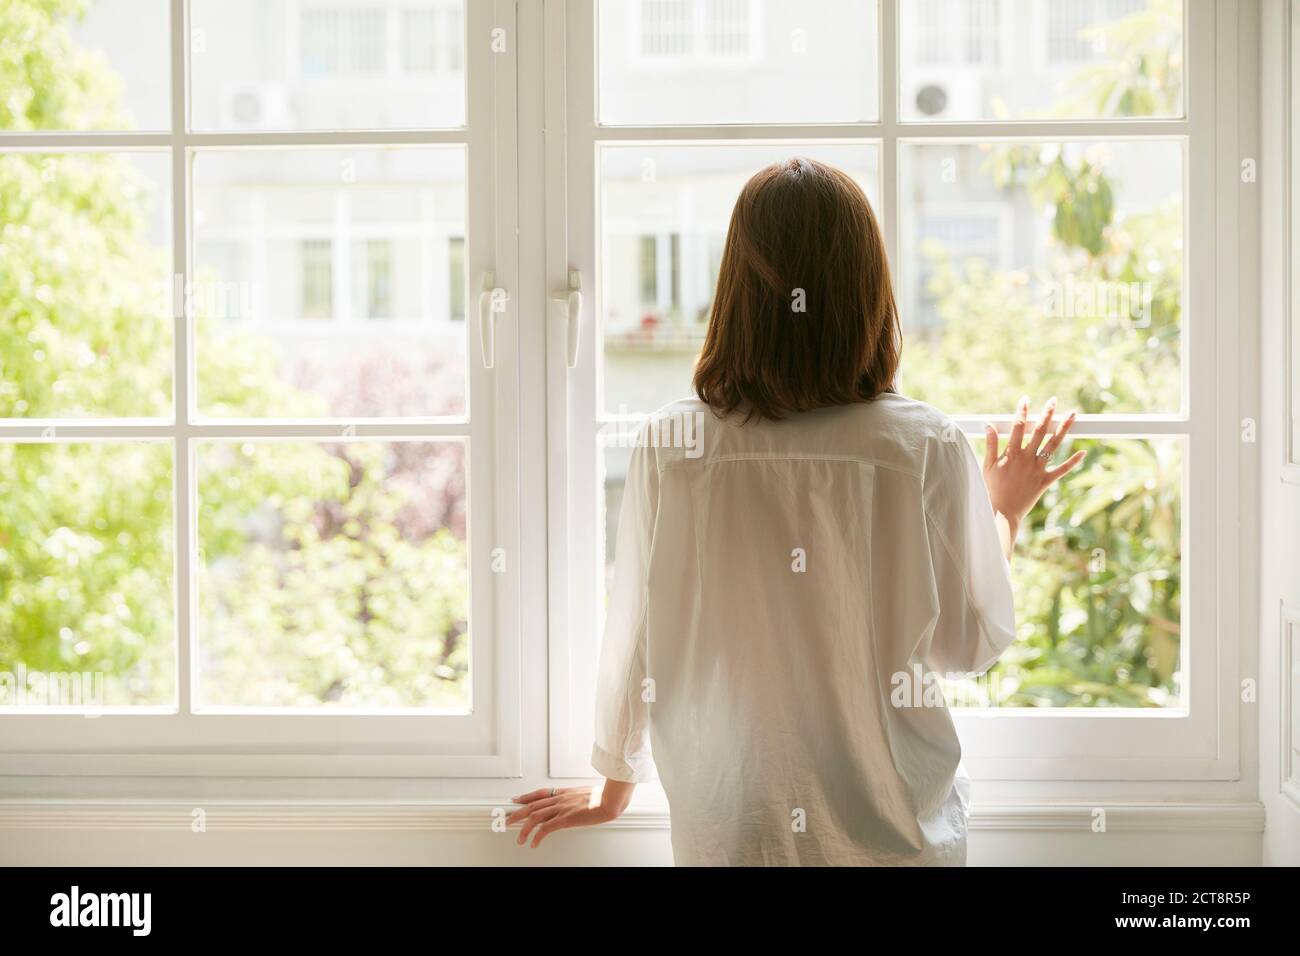 rear view of a young asian woman looking out of window at home Stock Photo